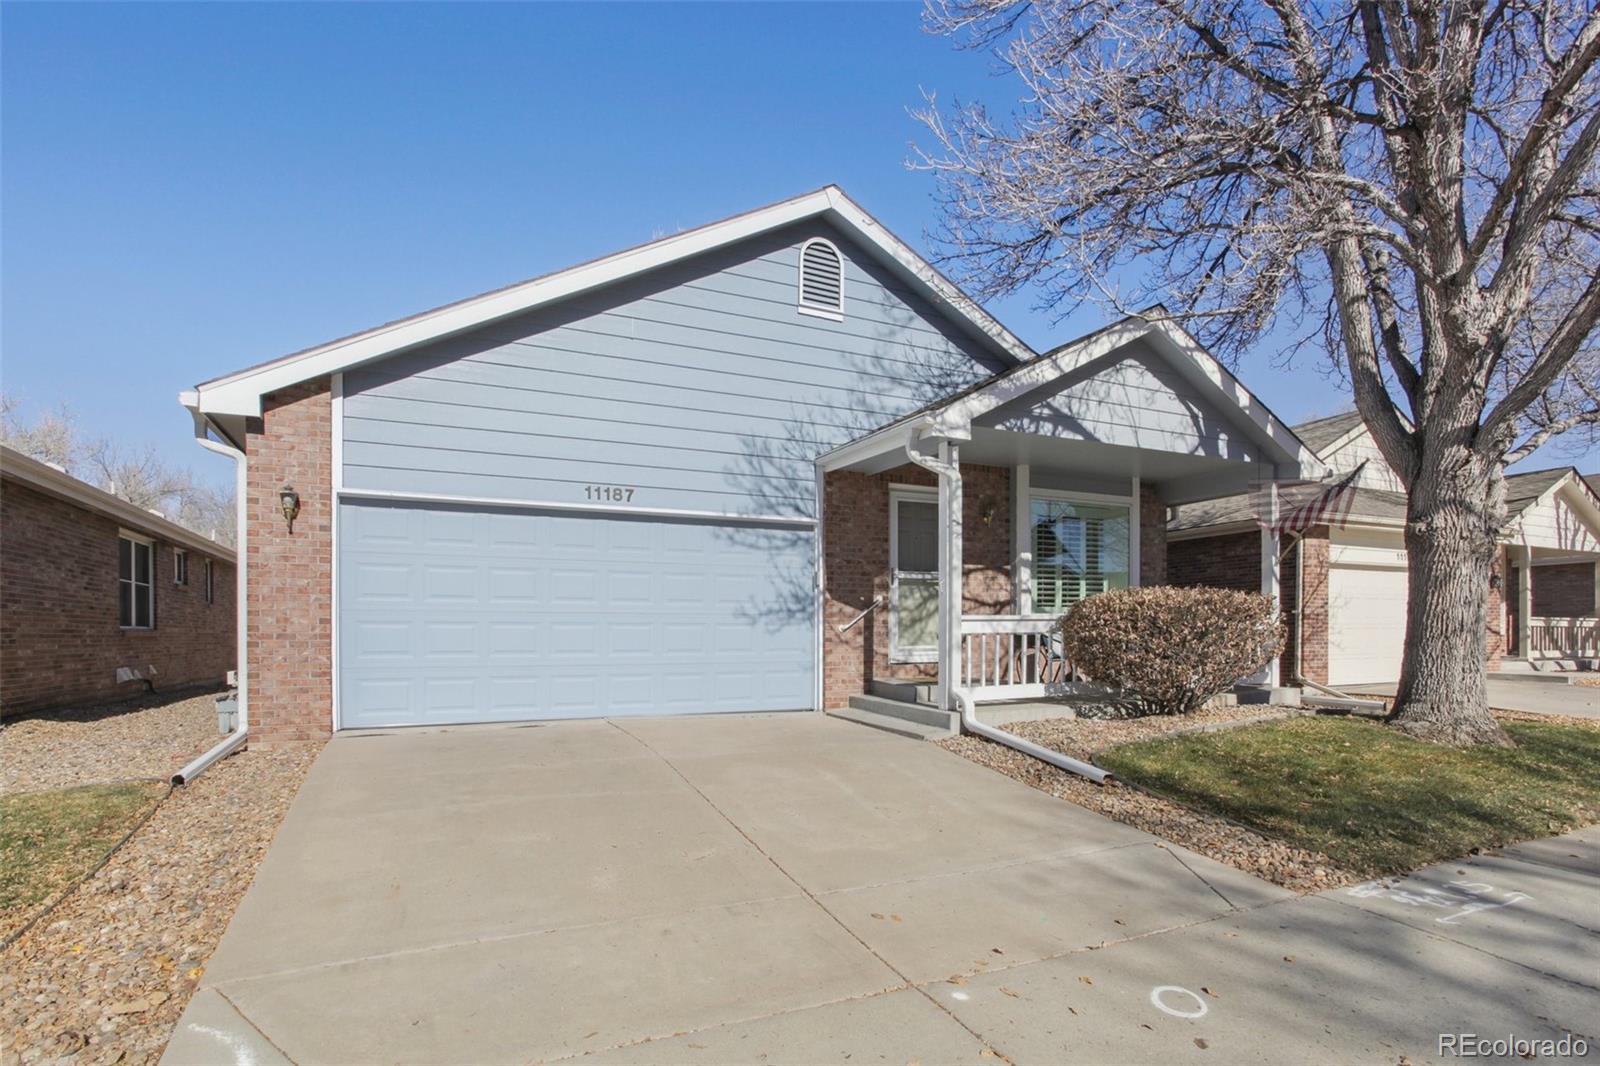 11187 w 64th place, Arvada sold home. Closed on 2024-02-16 for $675,000.